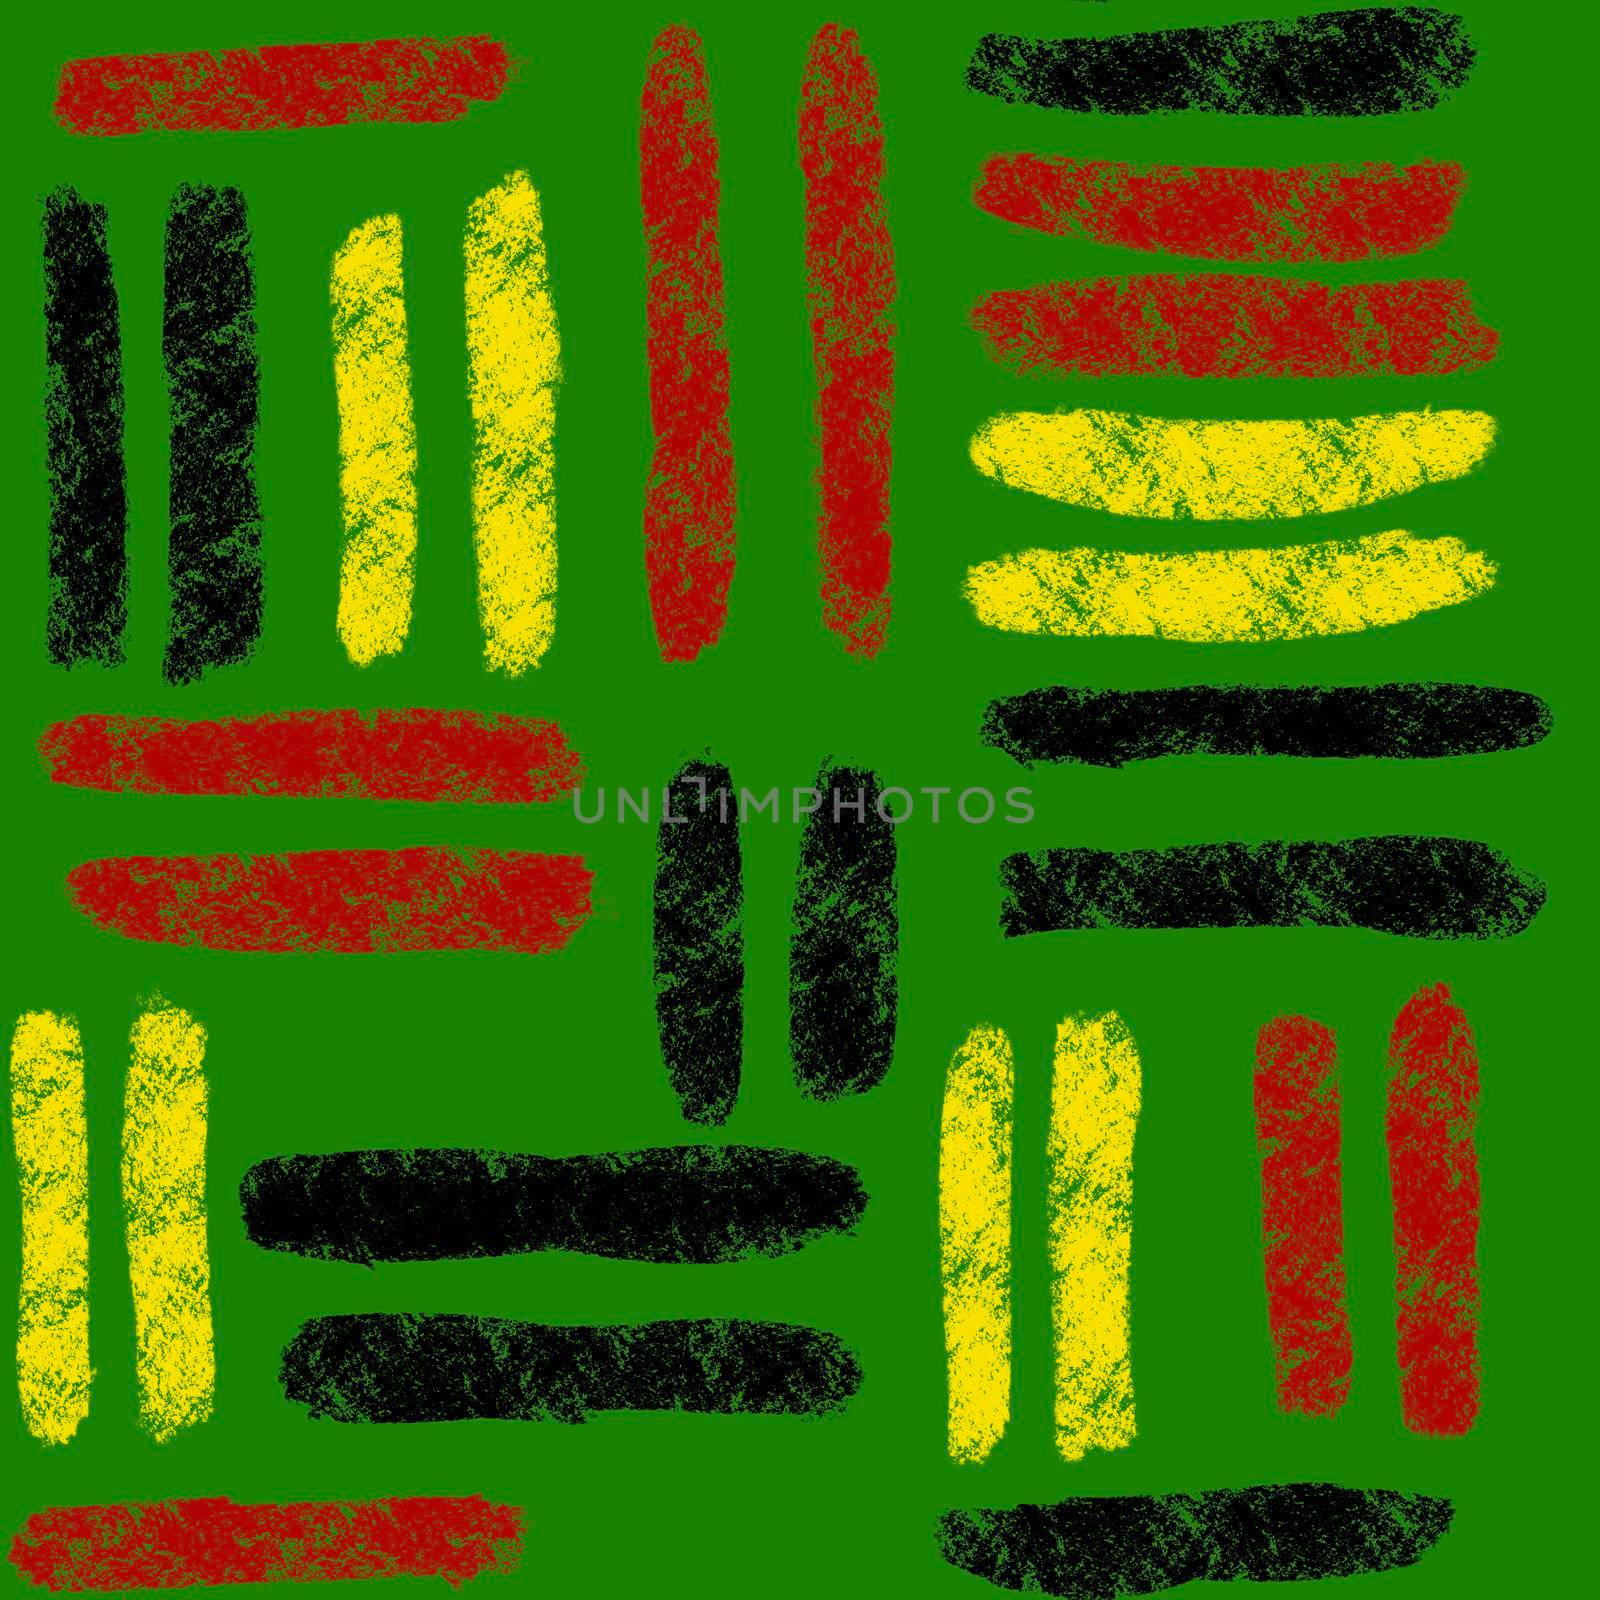 Hand drawn seamless pattern with african geometric ornament design print, Juneteenth freedom 1865 fabric, yellow green red black abstract shapes kente cloth, ethnic background. by Lagmar